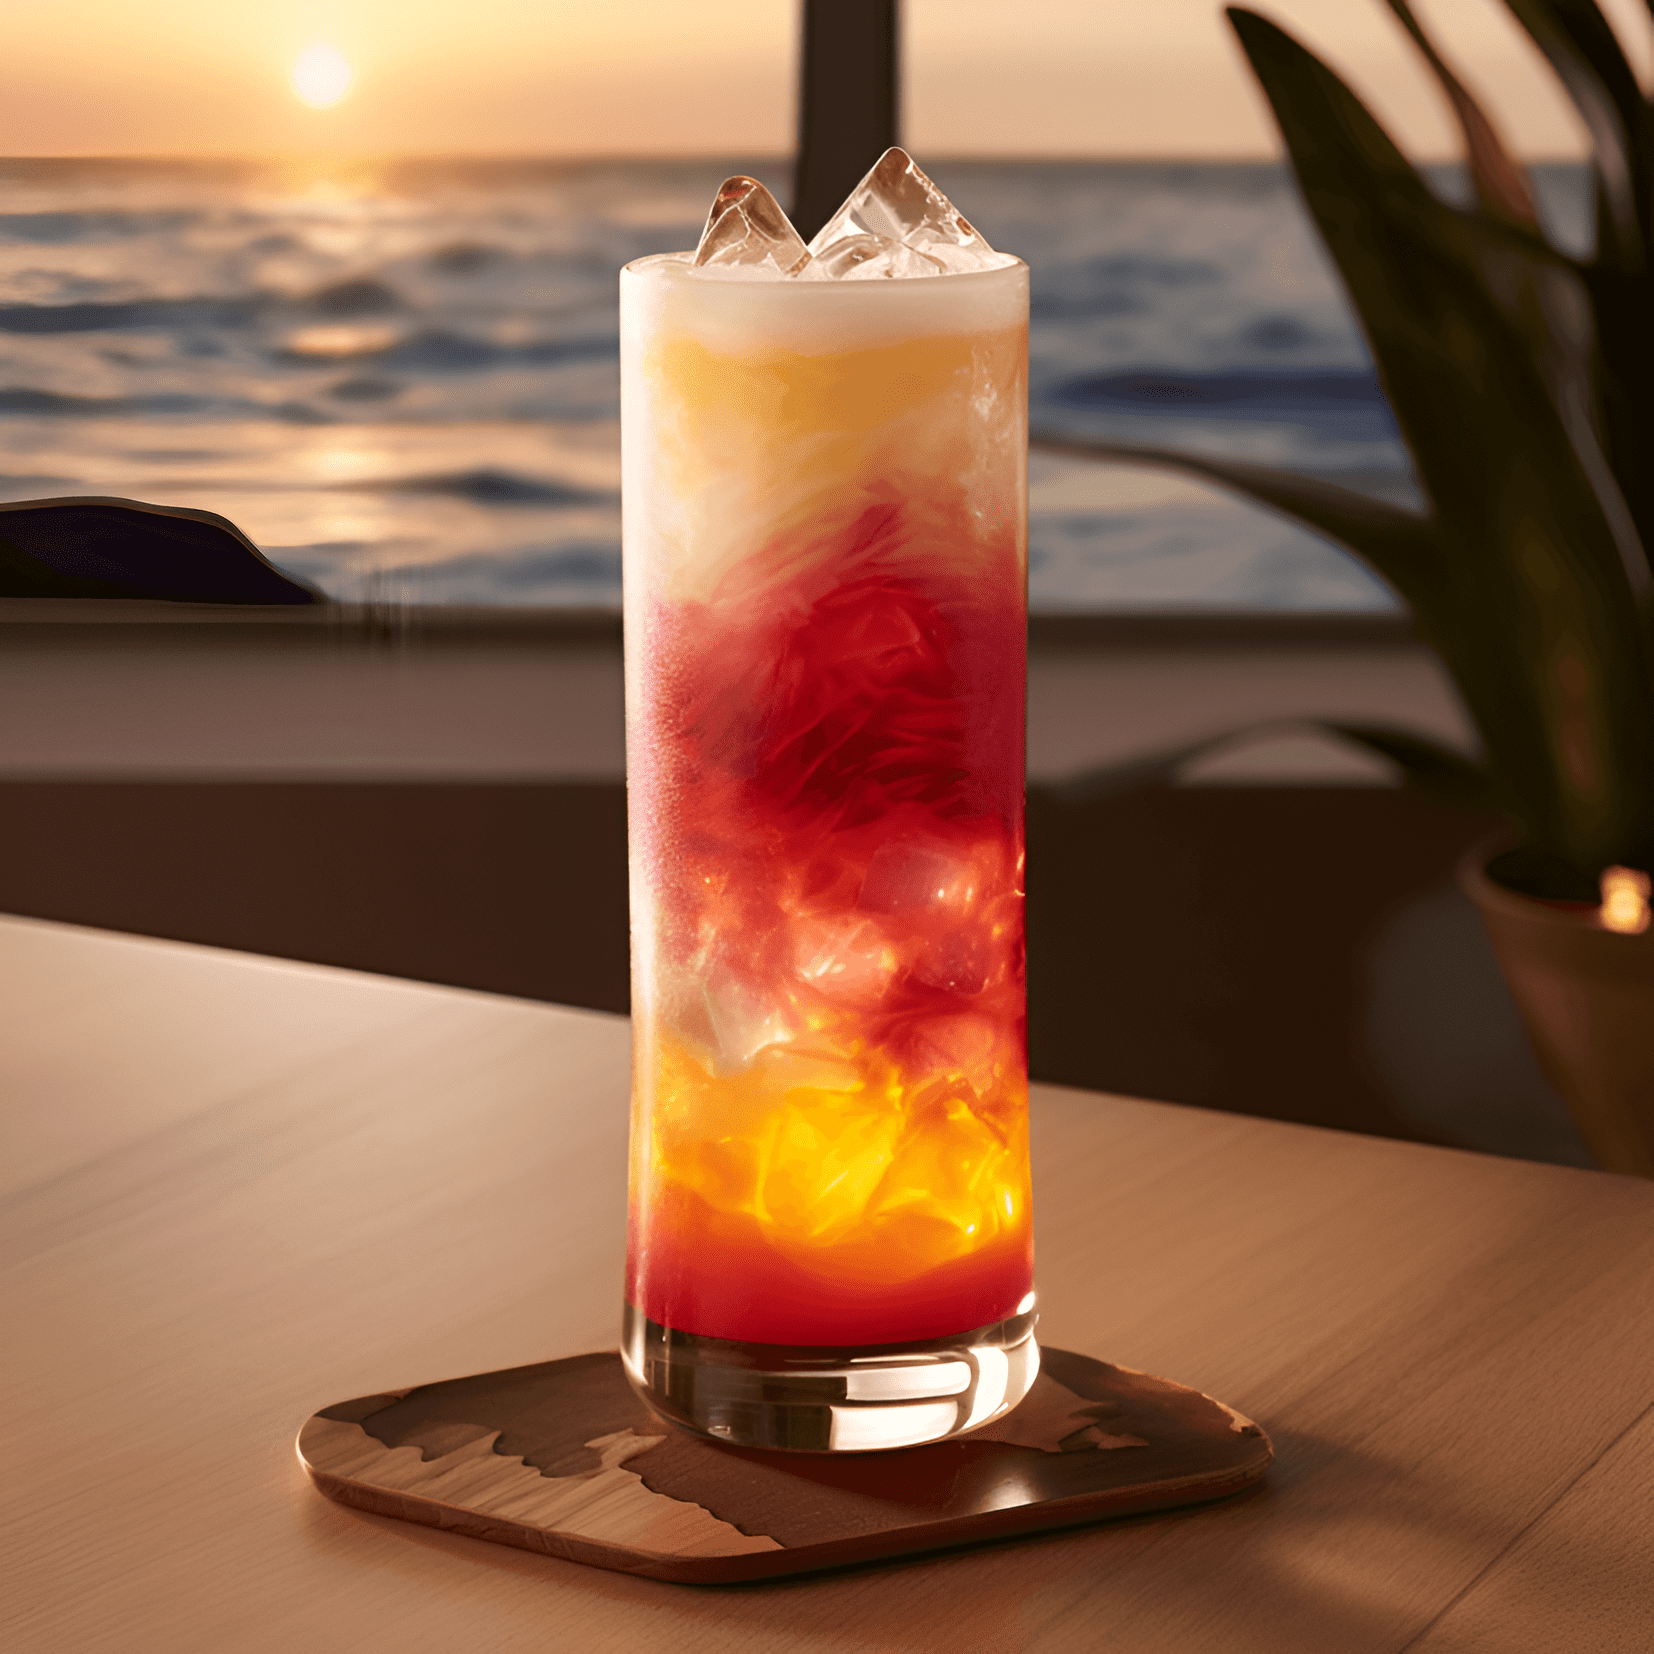 Malibu Cocktail Recipe - The Malibu cocktail is a sweet, fruity, and refreshing drink with a hint of coconut. It has a light and tropical taste, making it perfect for warm weather and beachside sipping.